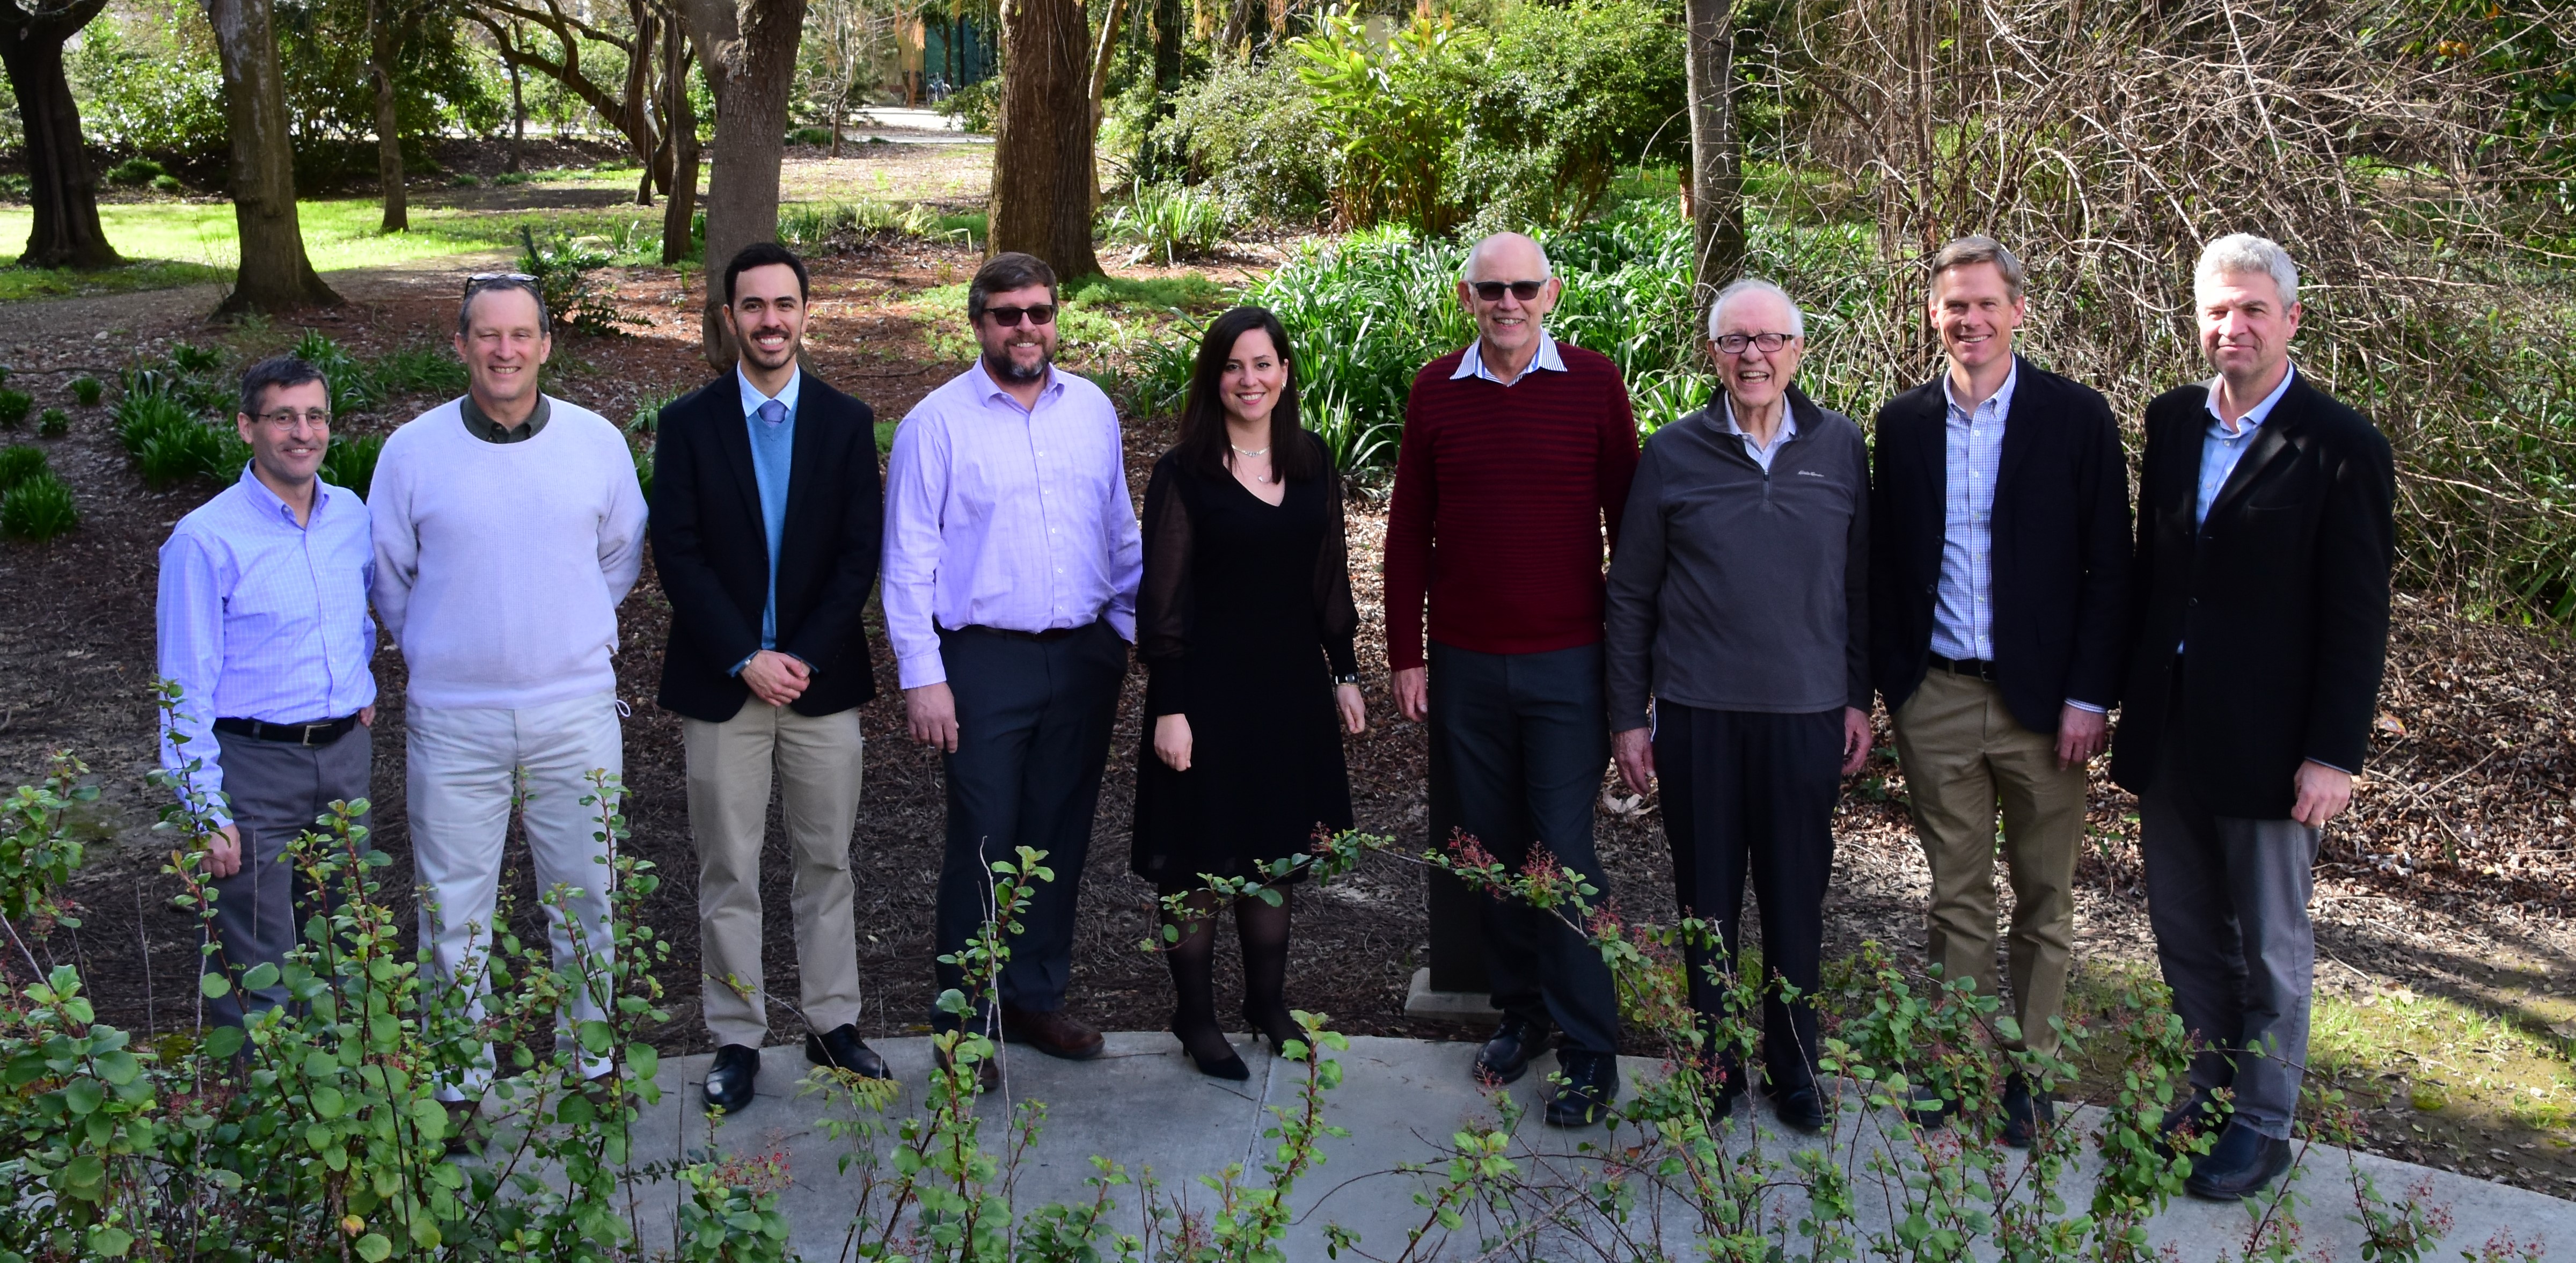 Professor Izzat “Ed” Idriss with geotechnical engineering faculty at UC Davis.